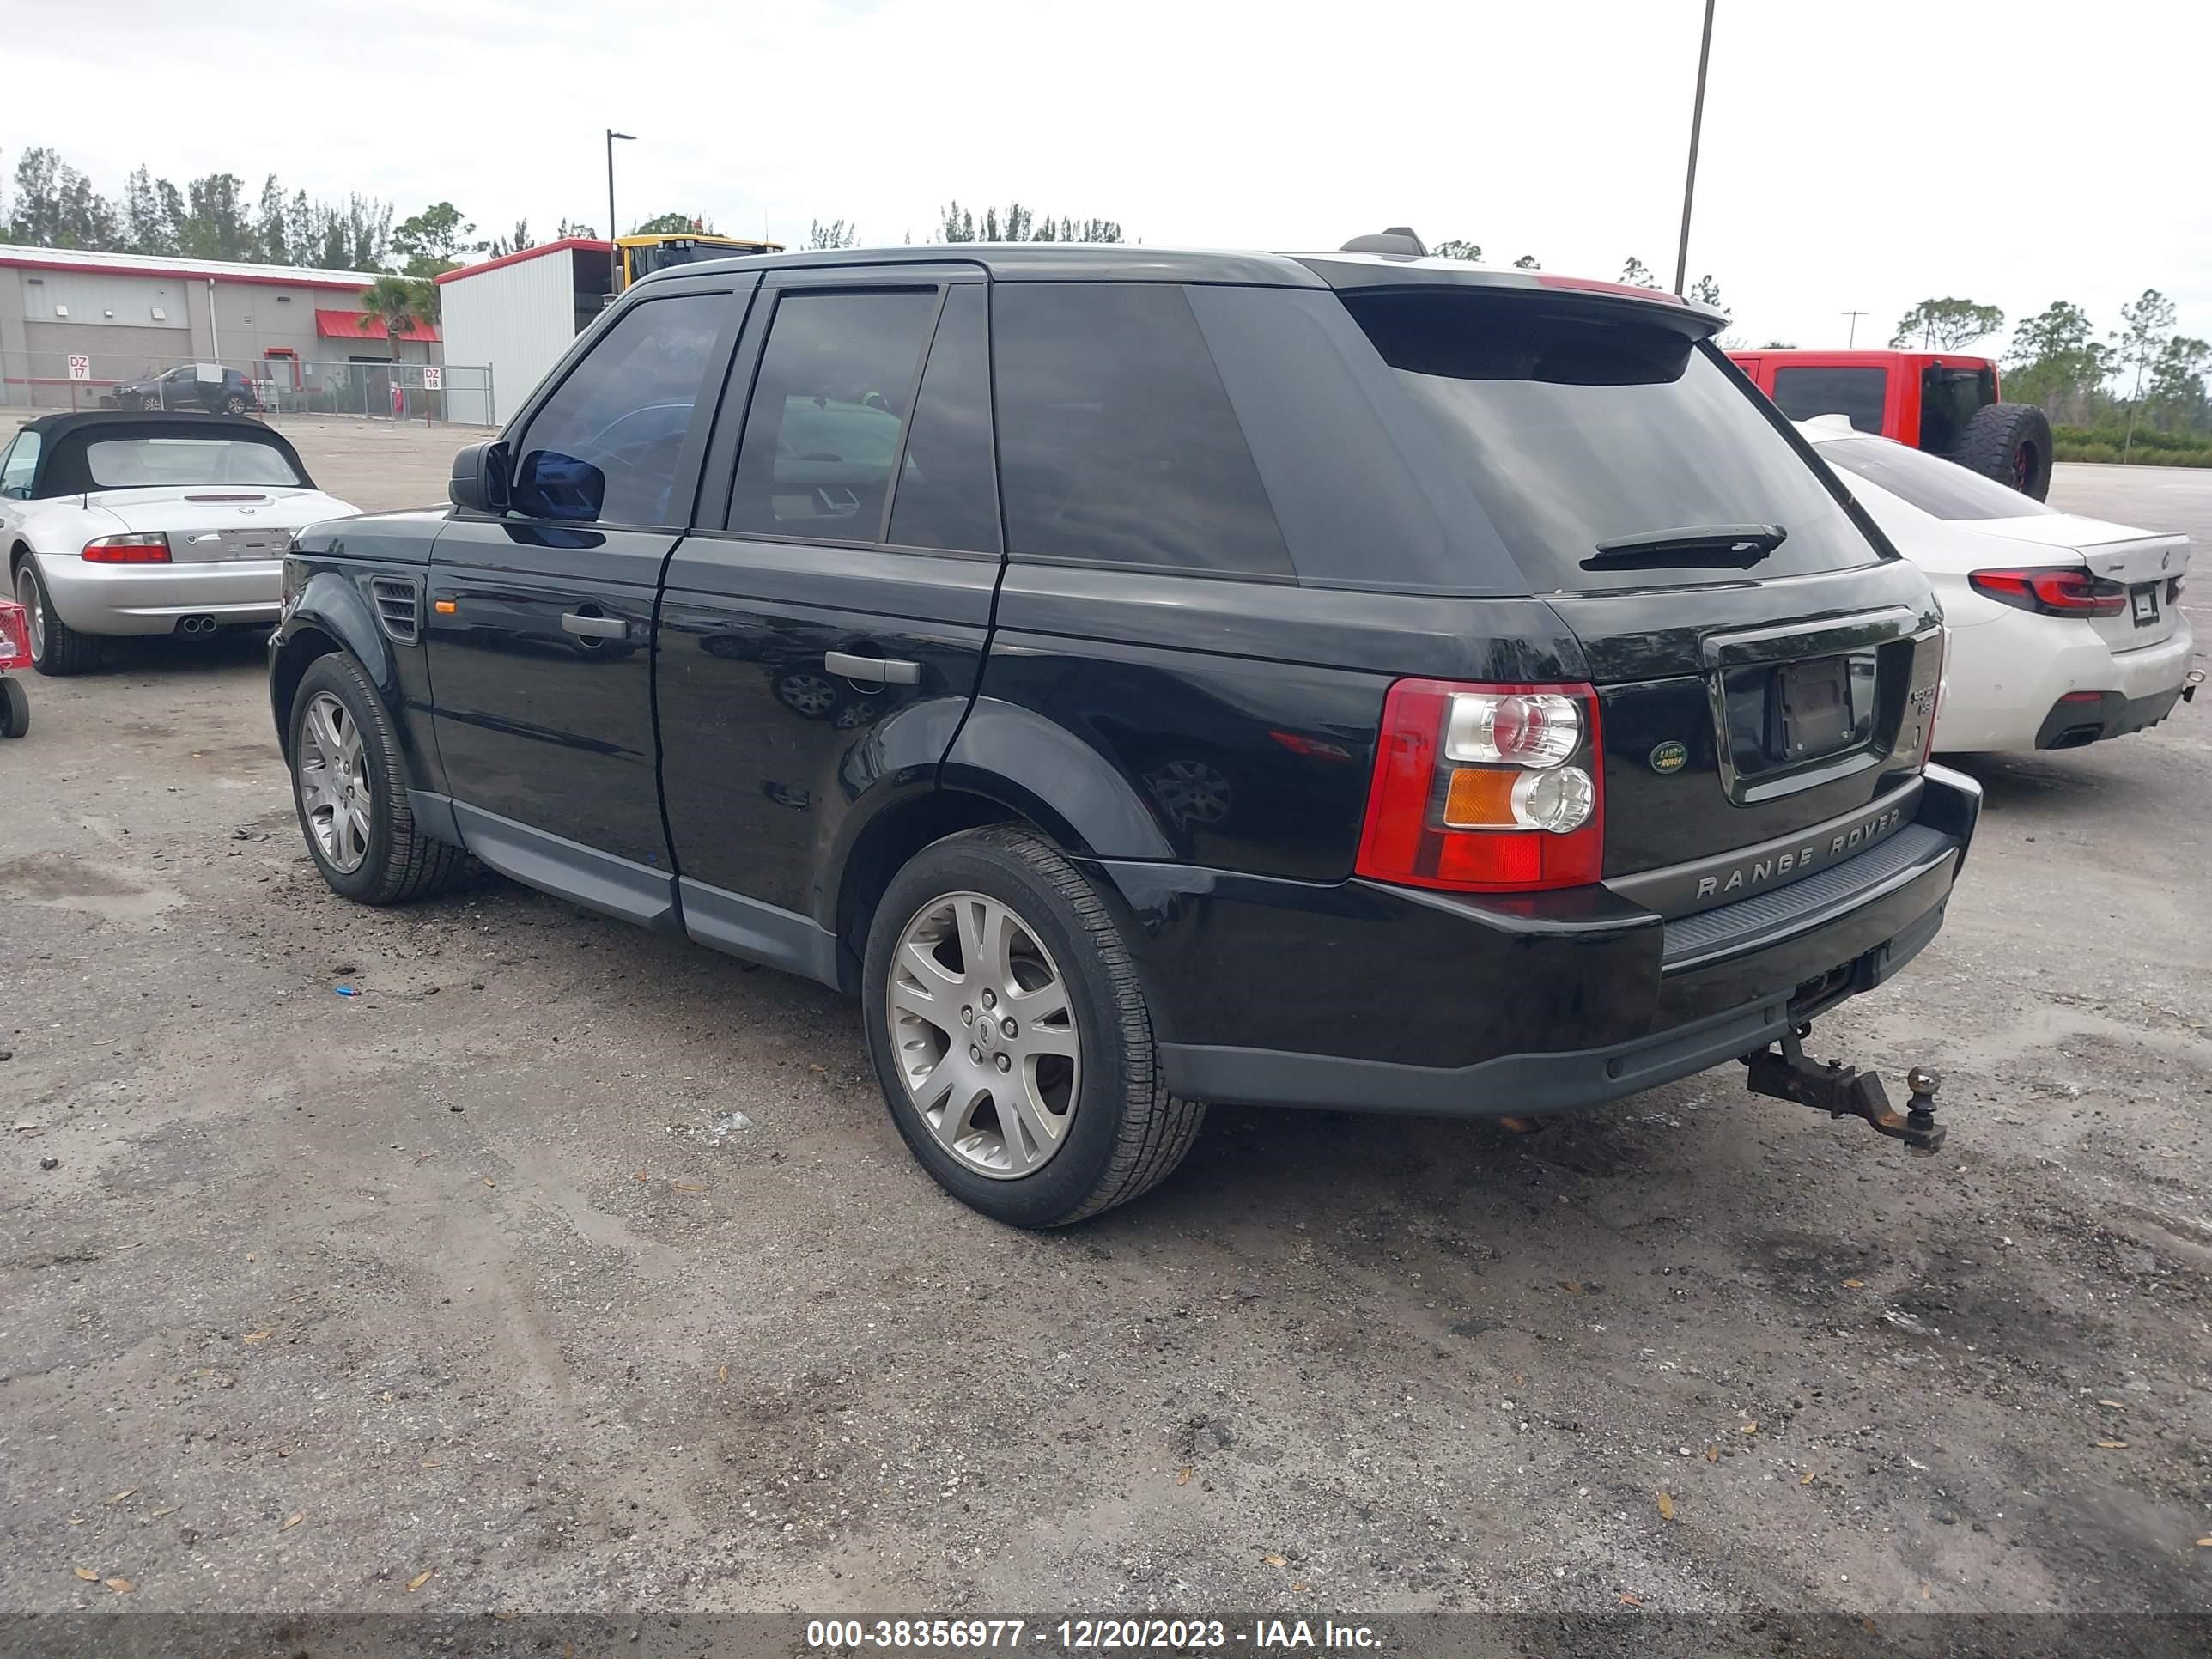 SALSF25436A904435  - LAND ROVER RANGE ROVER SPORT  2006 IMG - 2